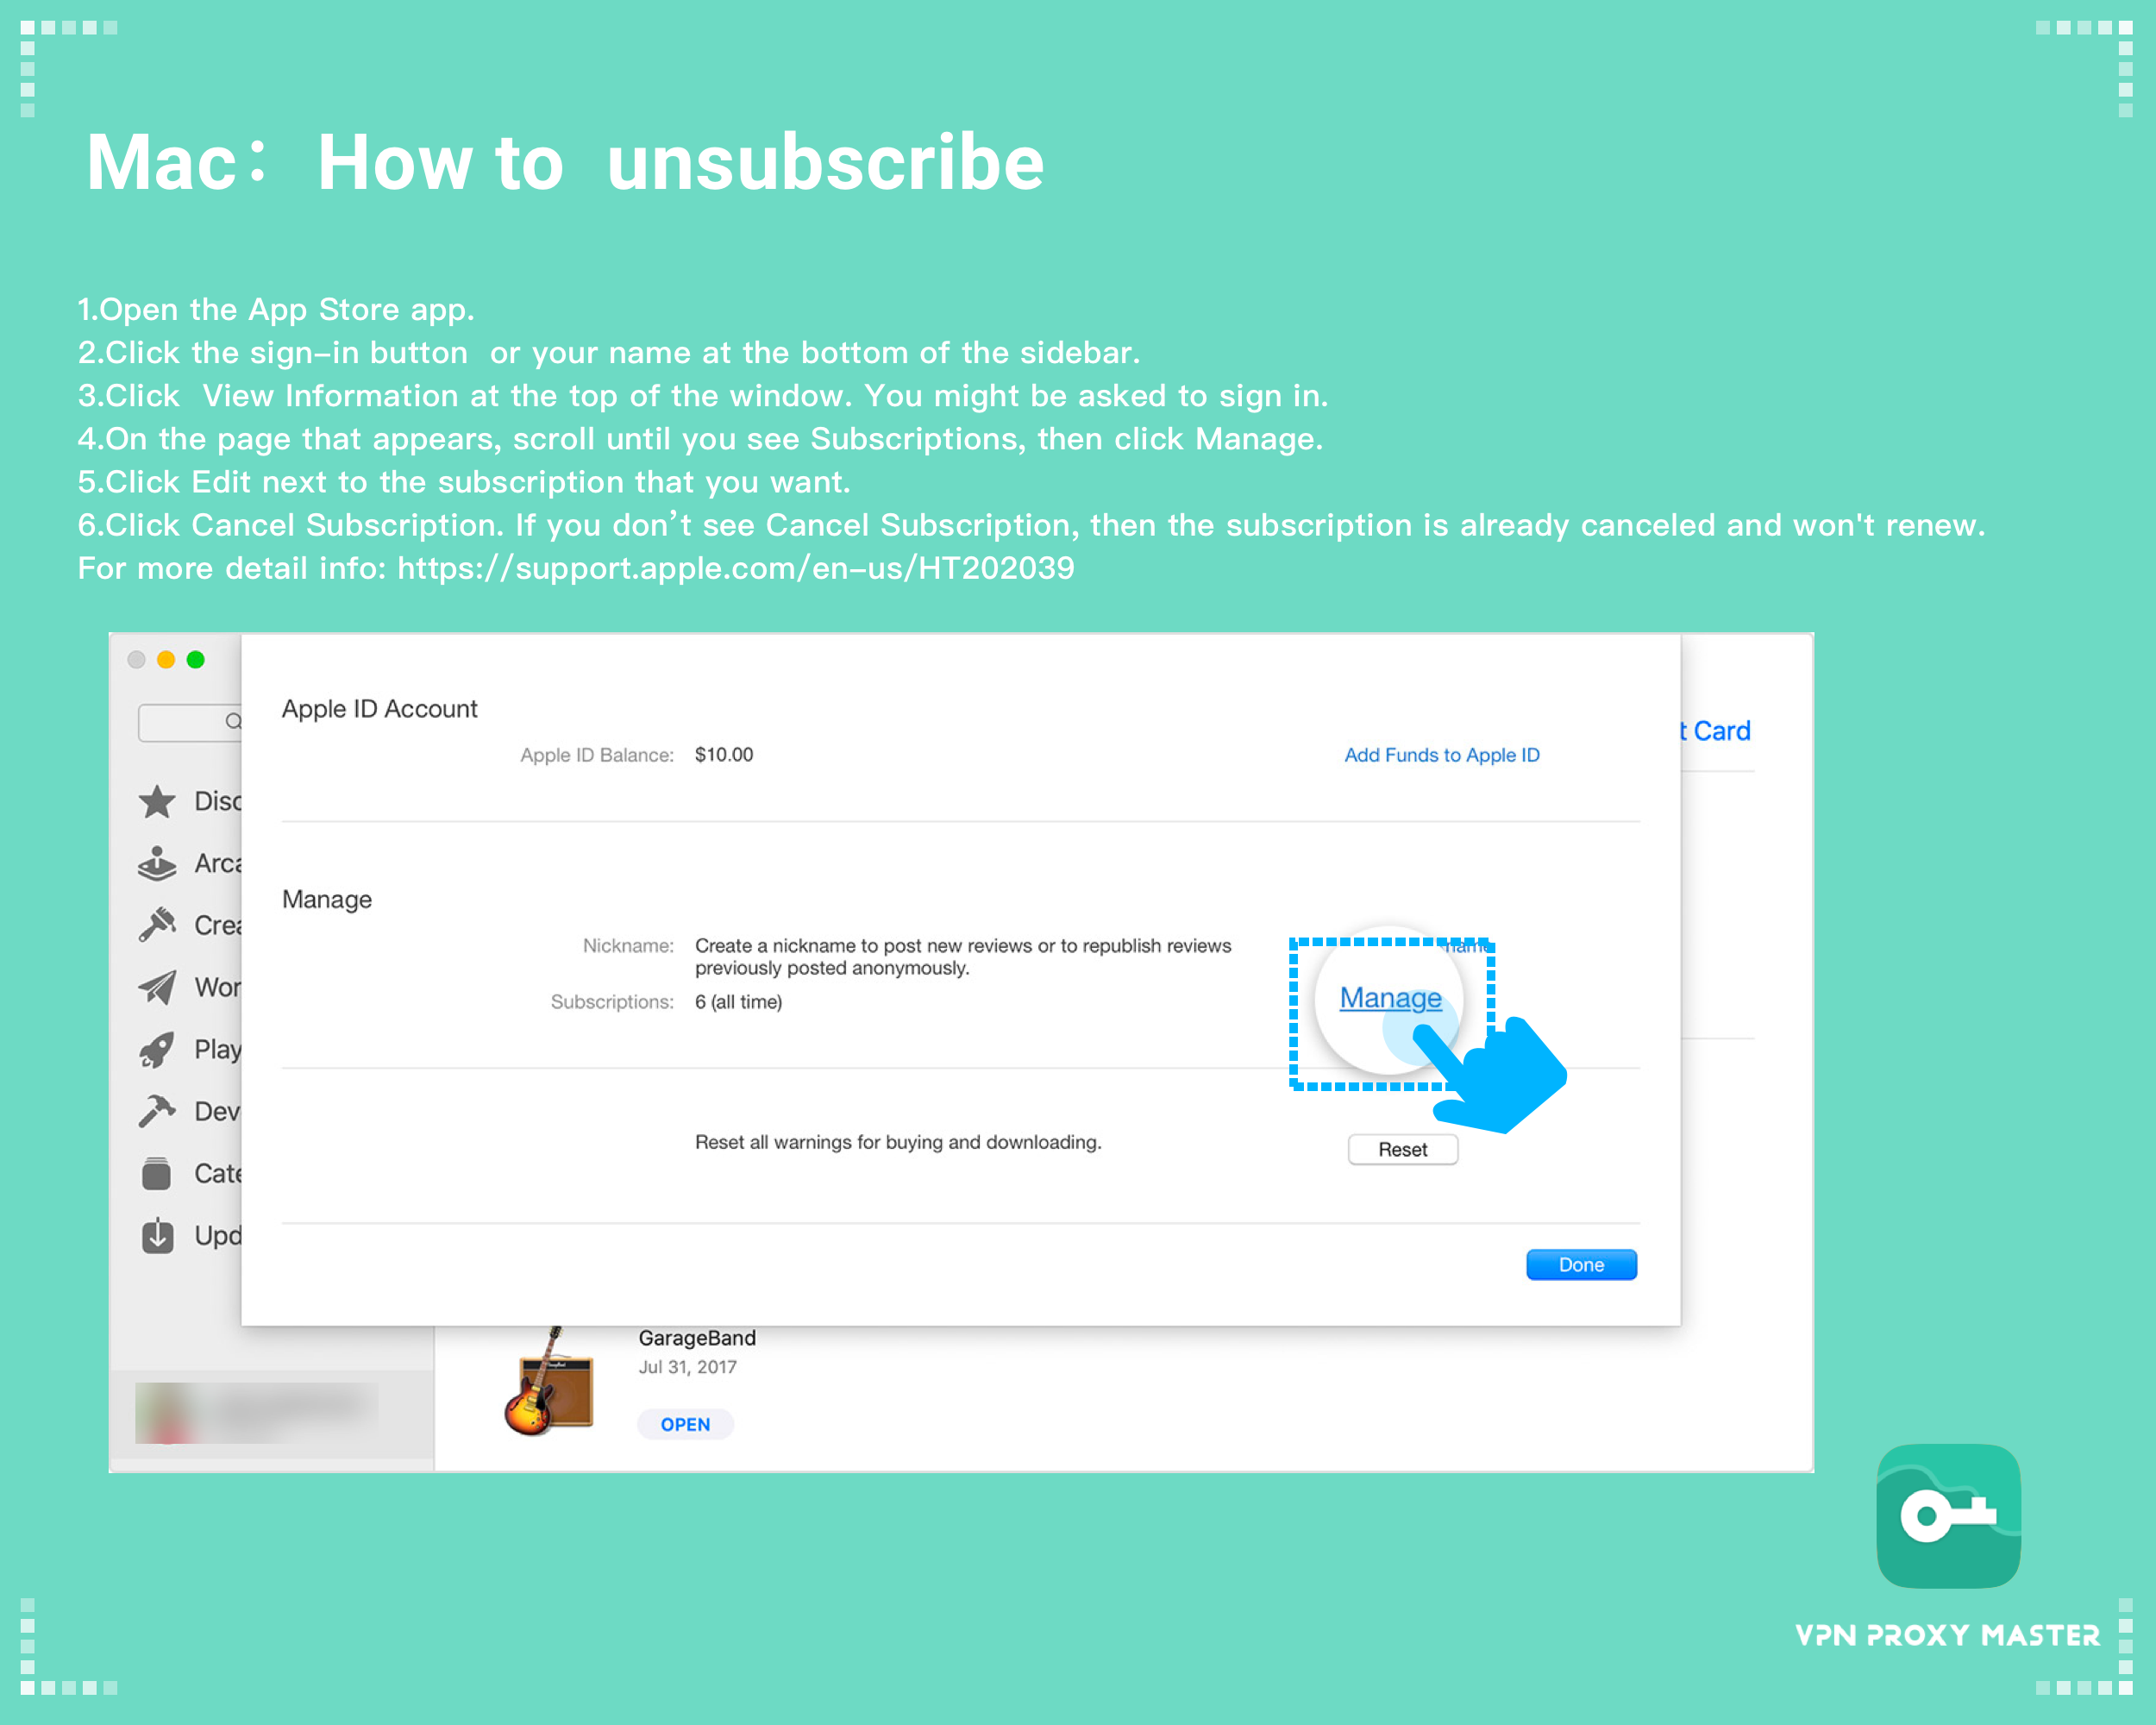 How to unsubscribe from only fans